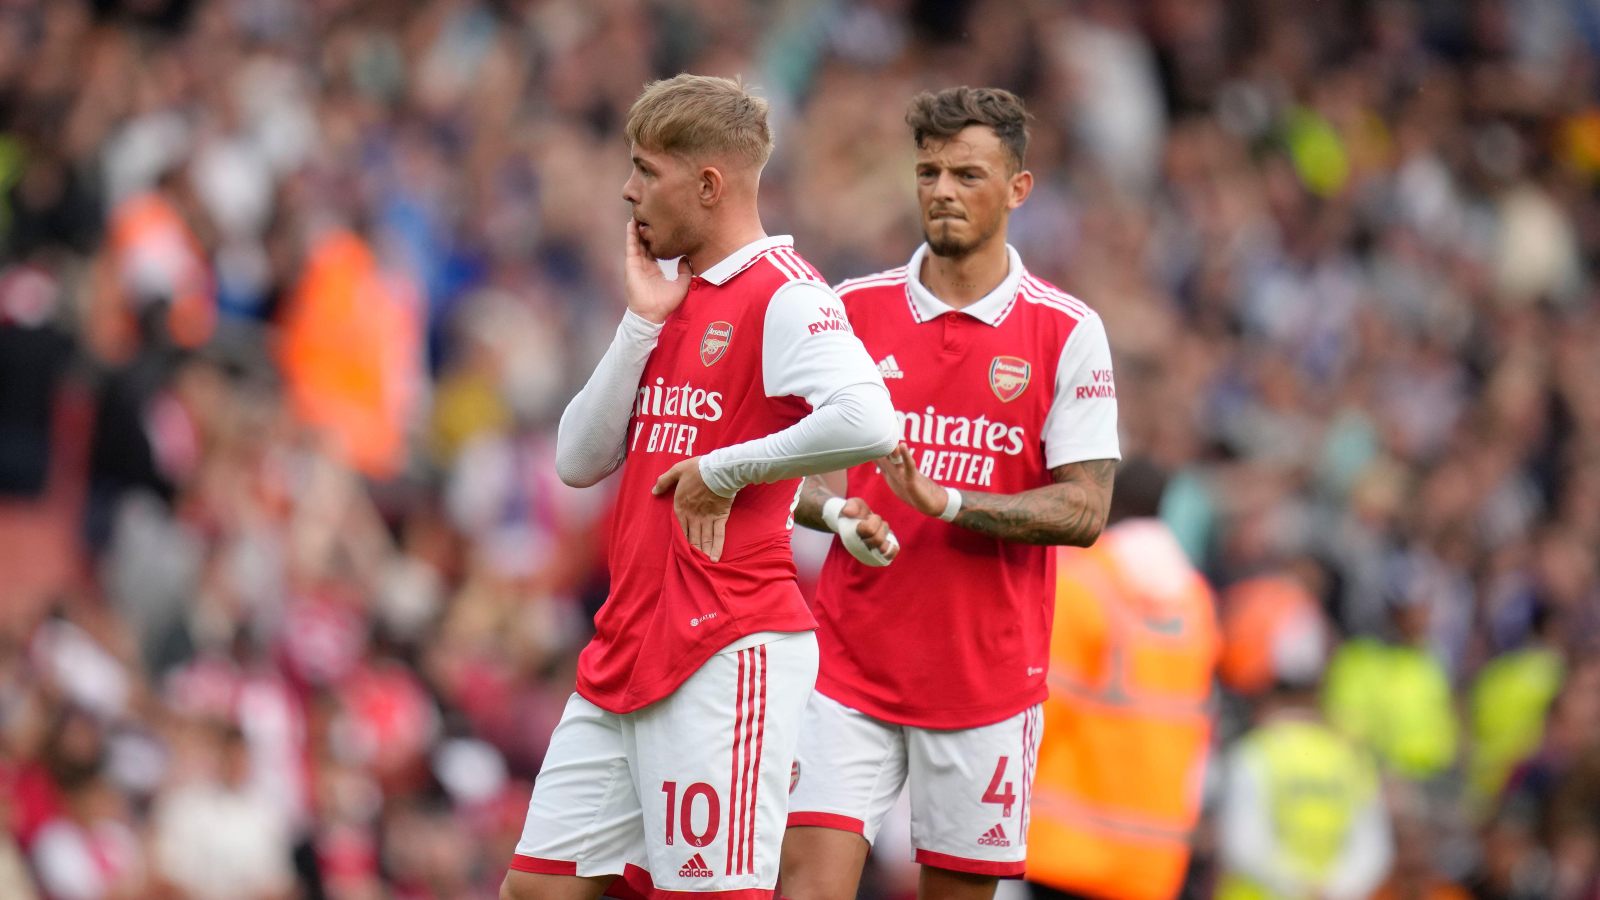 Arsenal players Emile Smith Rowe and Ben White look dejected